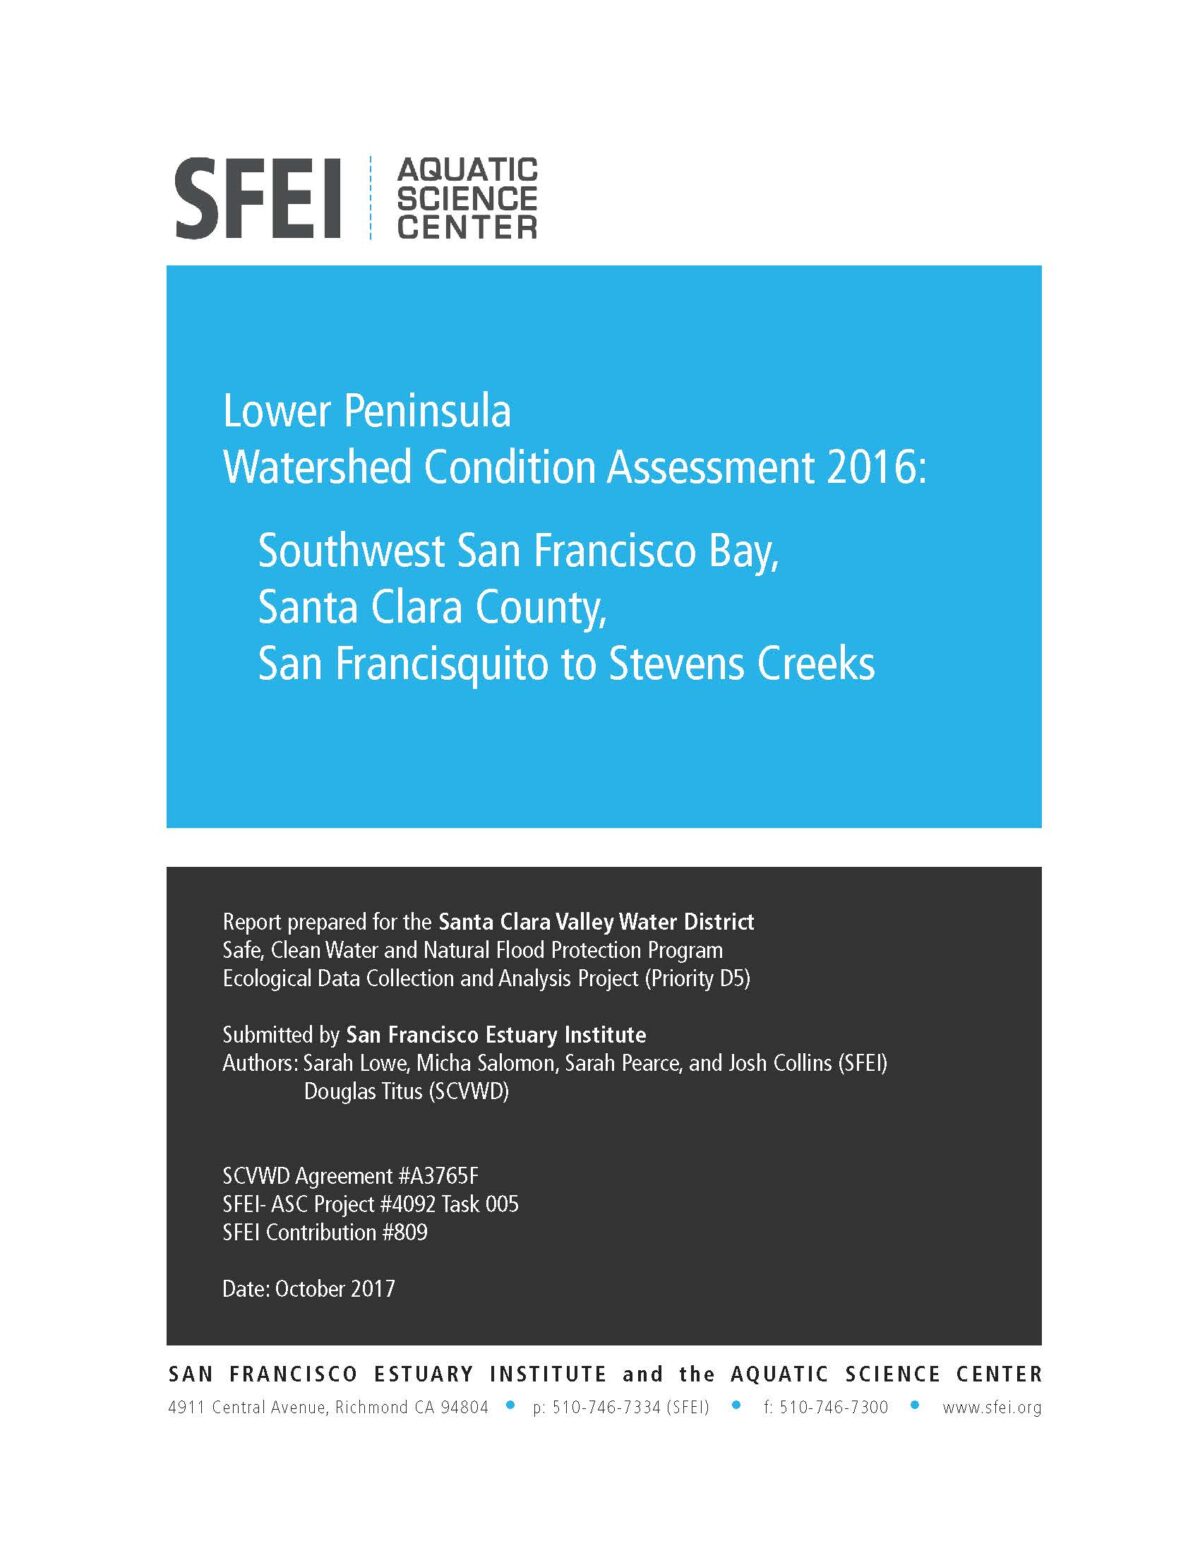 Lower Peninsula Watershed Condition Assessment 2016. Technical memorandum prepared for the Santa Clara Valley Water District – Priority D5 Project